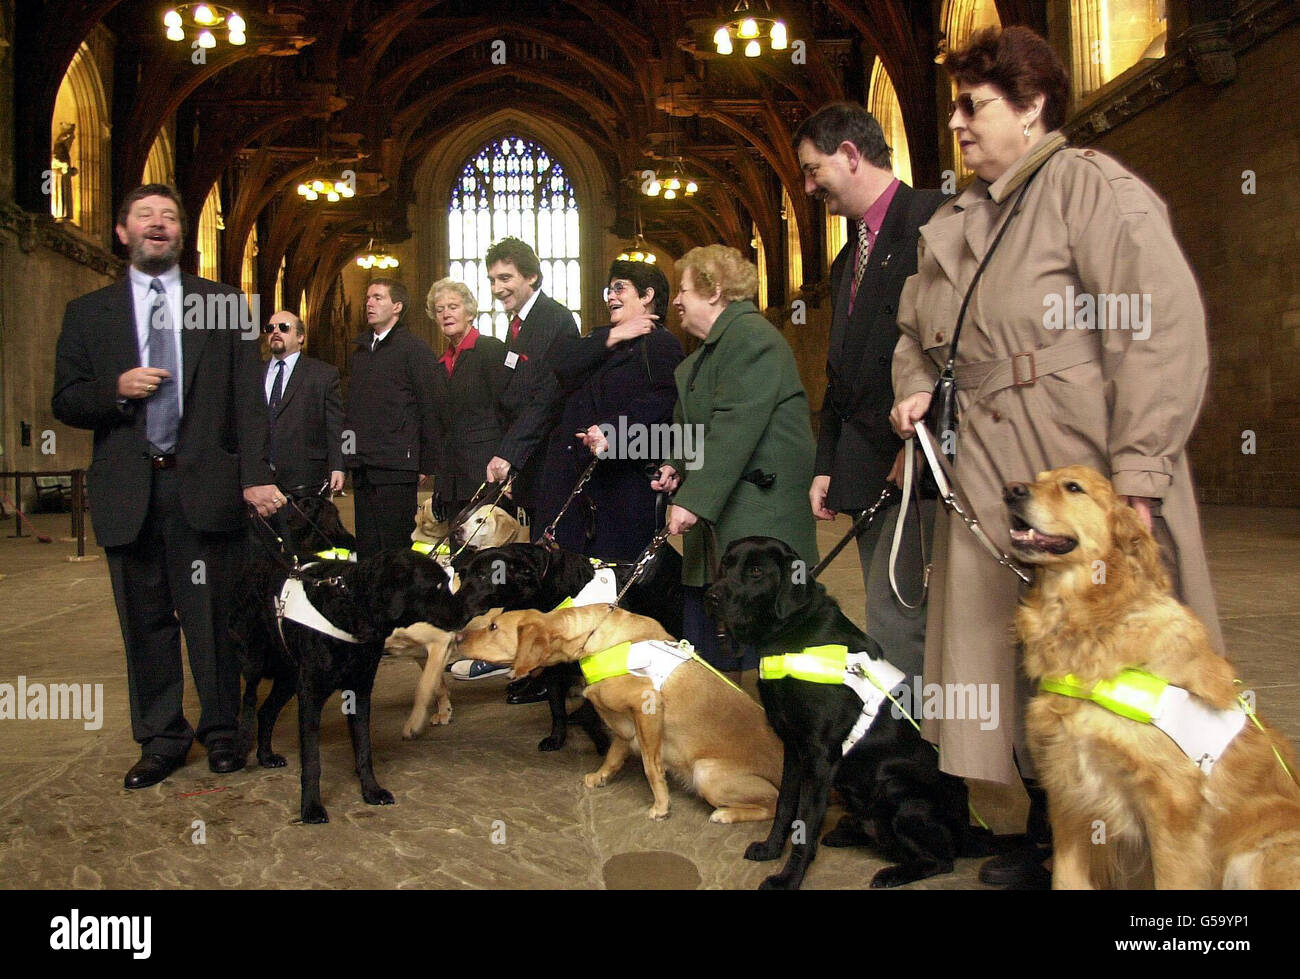 Education Secretary David Blunkett (left) and his guide dog, Lucy, meet members of The Guide Dogs for the Blind Association in the Great Hall, Houses of Parliament, London. * The reception celebrated the introduction of legislation requiring licensed taxi drivers to carry guide dogs in their cars following a campaign launched about a year ago after guide dog owners complained they had been left stranded by cab drivers who refused to take their dogs. Stock Photo